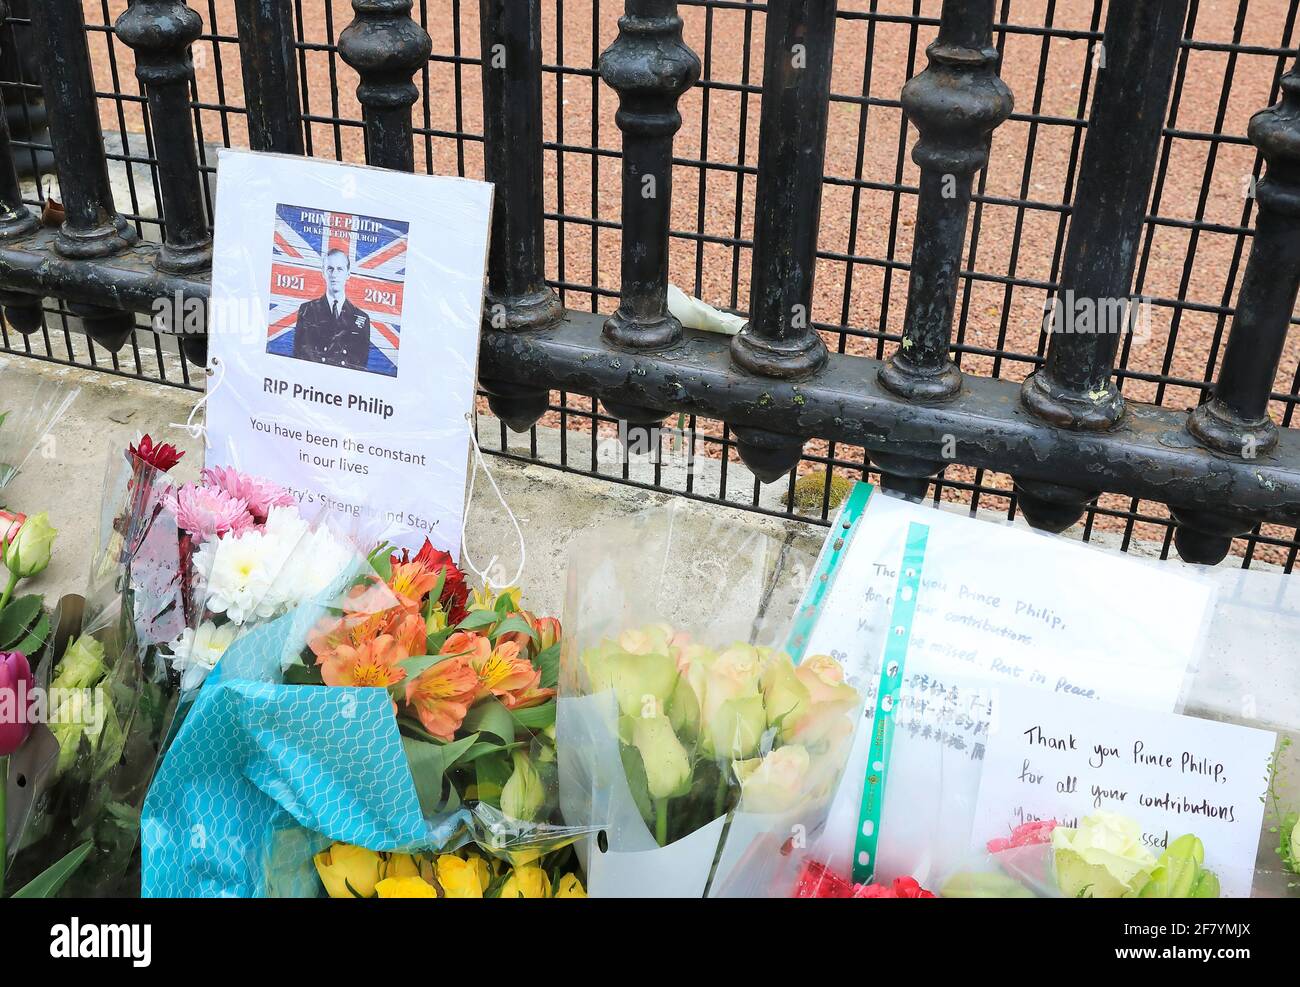 London, UK, April 10th 2021. People queued up to lay flowers outside the gates of Buckingham palace to pay their respects and remember HRH Prince Philip who died on Friday aged 99. Monica Wells/Alamy Live News Stock Photo